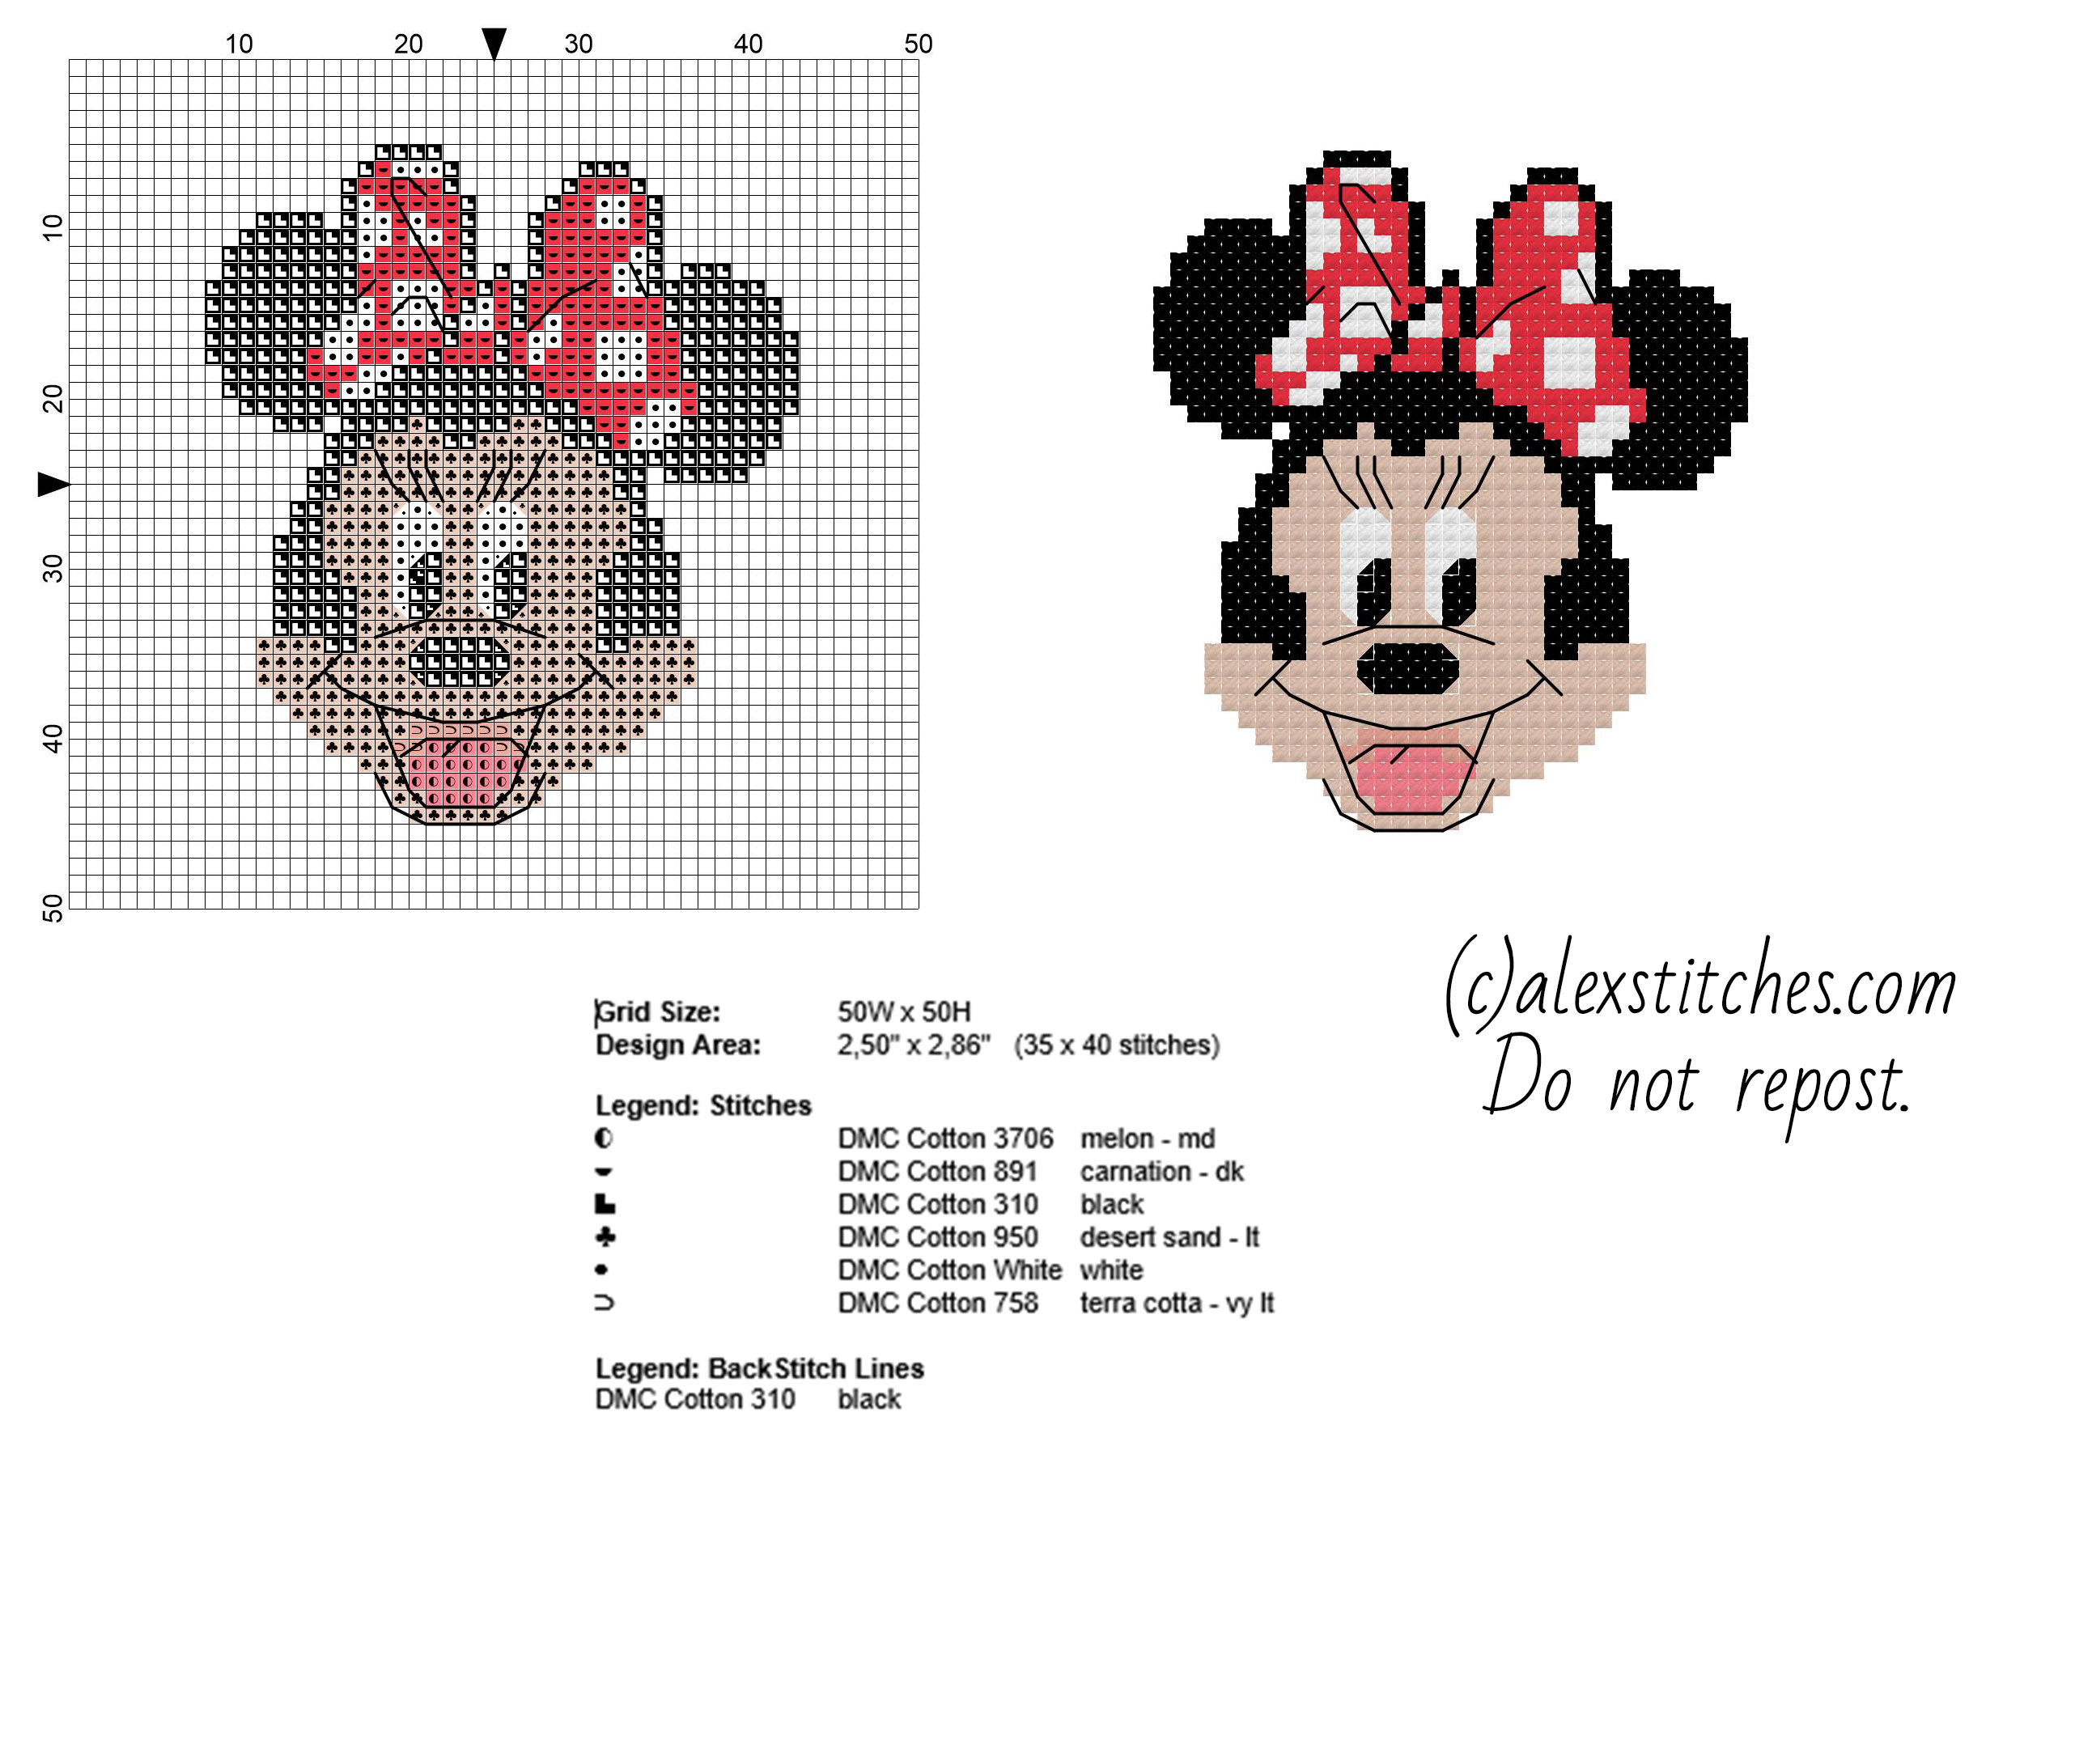 Minnie Mickey Mouse cartoon character free small cross stitch pattern -  free cross stitch patterns by Alex